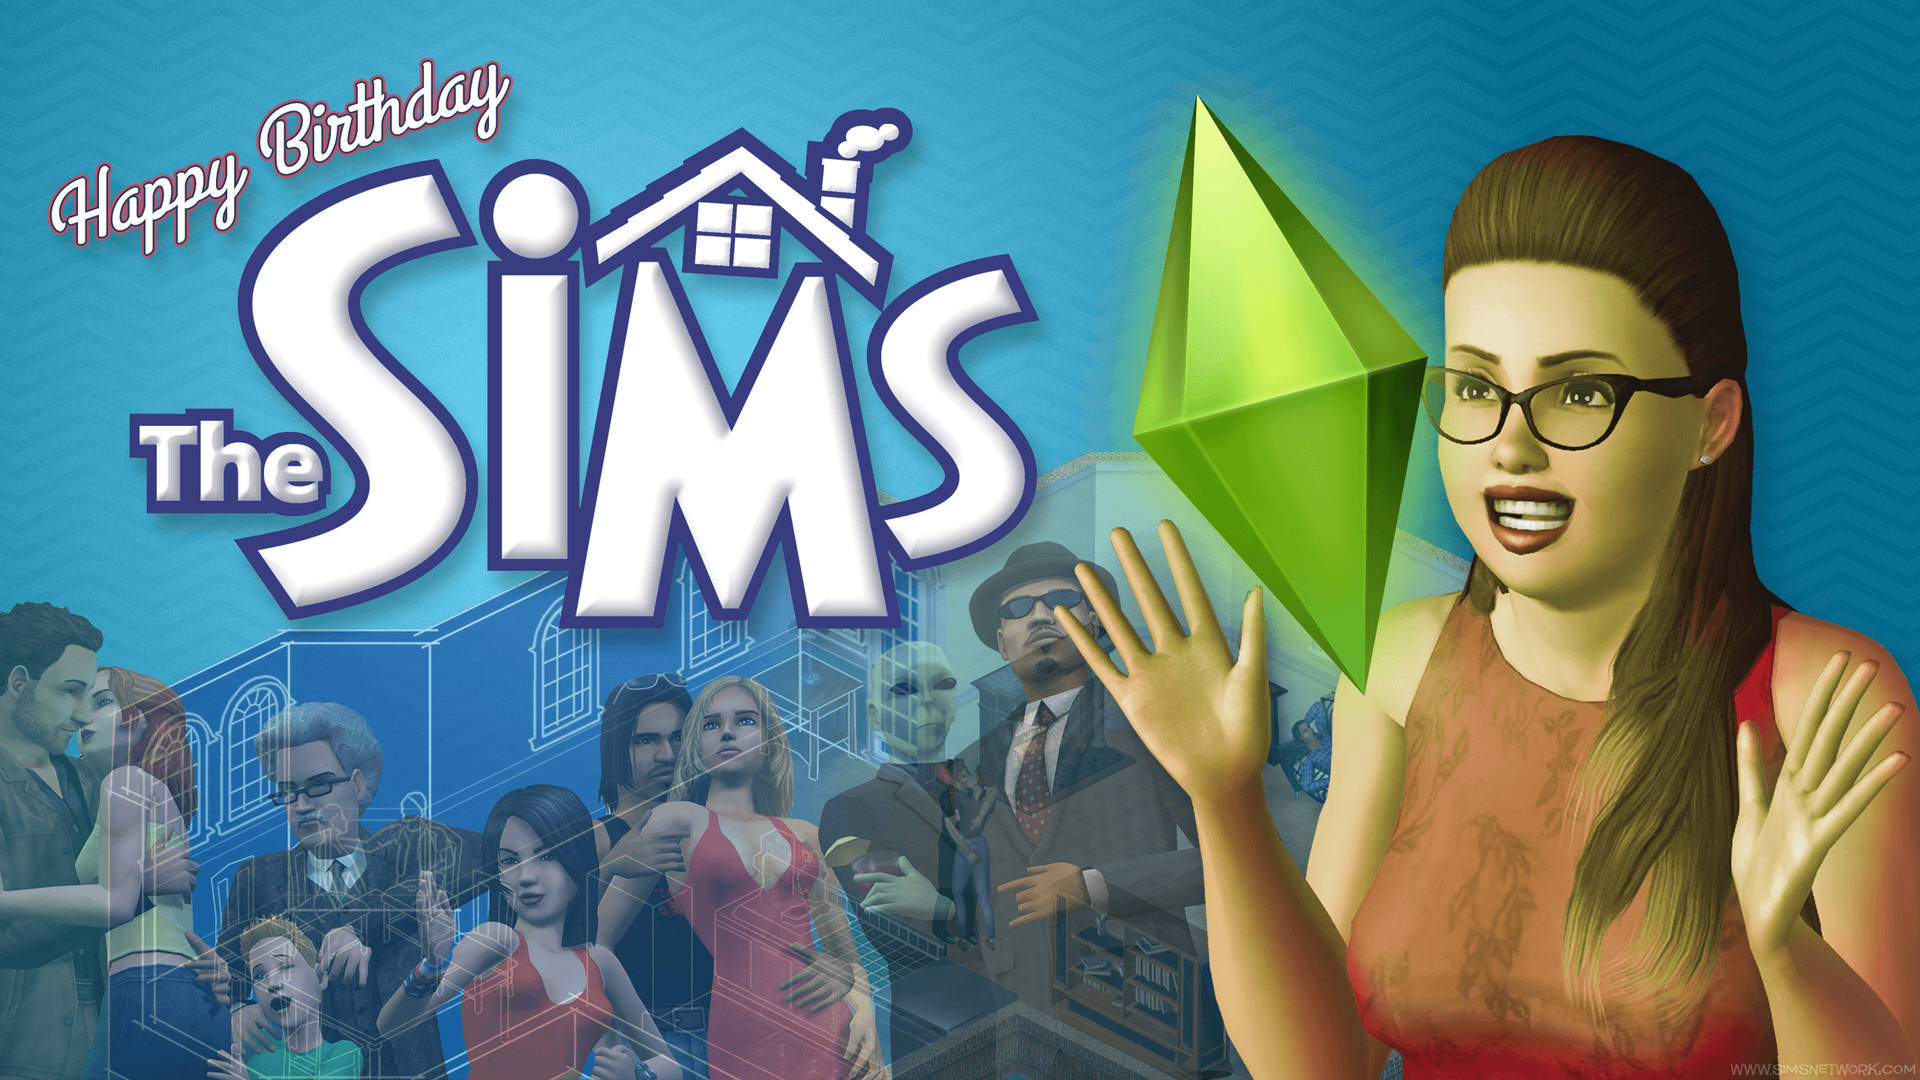 The Sims Lady With Eyeglasses